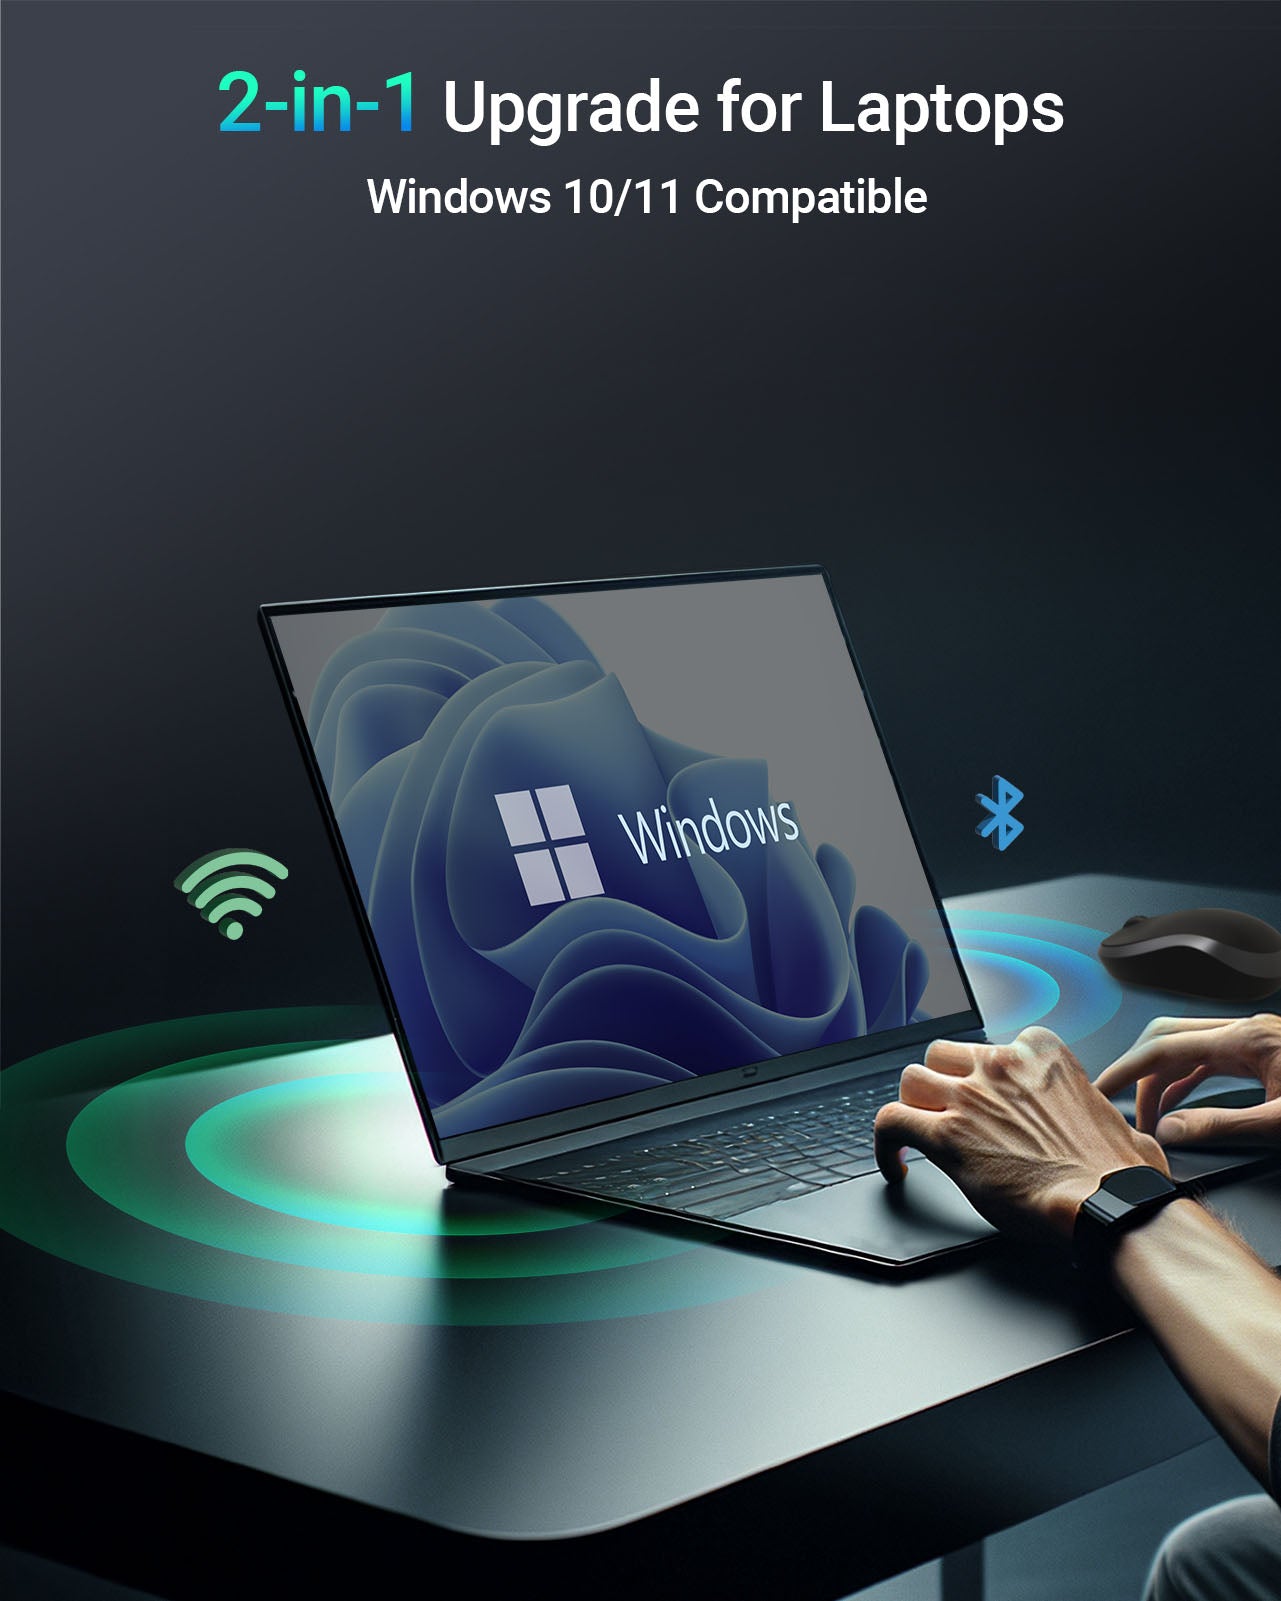 M.2 WiFi Card Supports Windows 10 and 11 Operating Systems 2-in-1 Upgrade for Laptop Driver Is available on BrosTrend Official Website